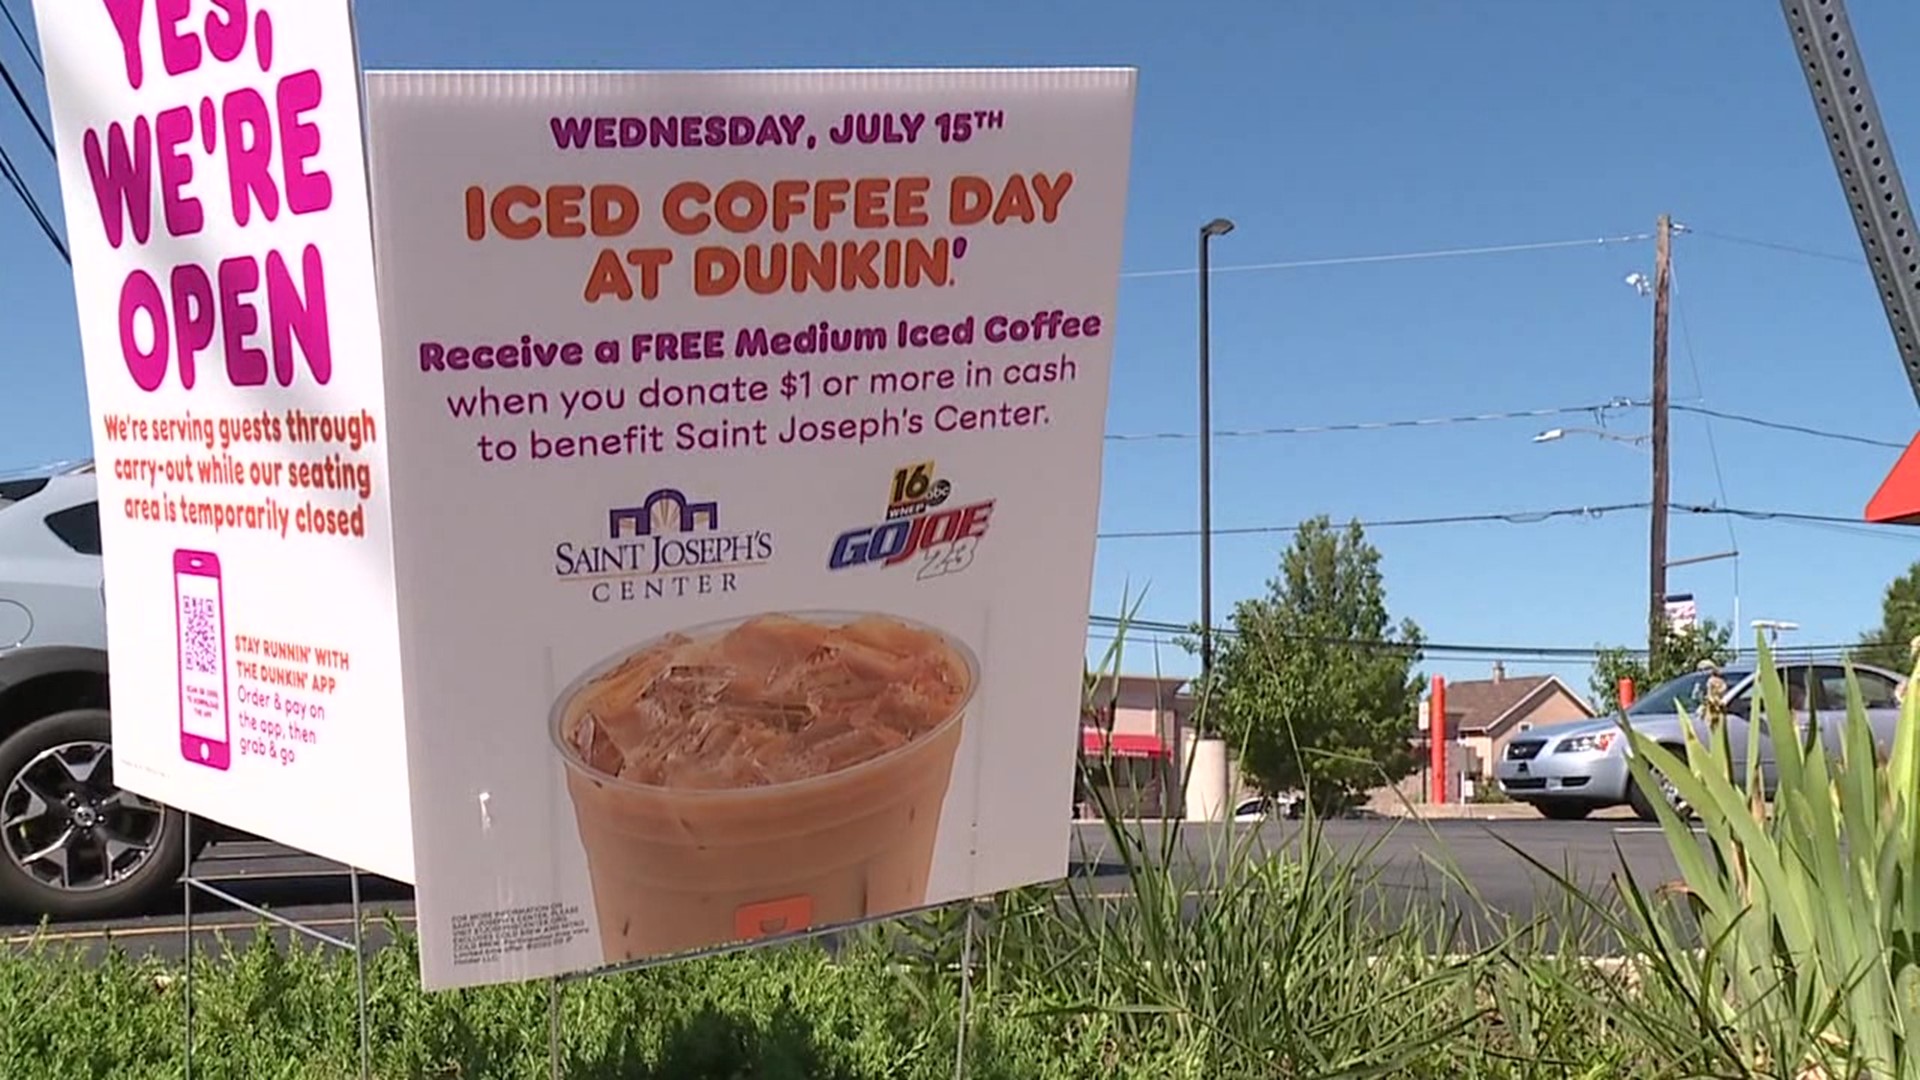 By donating a dollar or more, people could get a free medium iced coffee or iced tea.